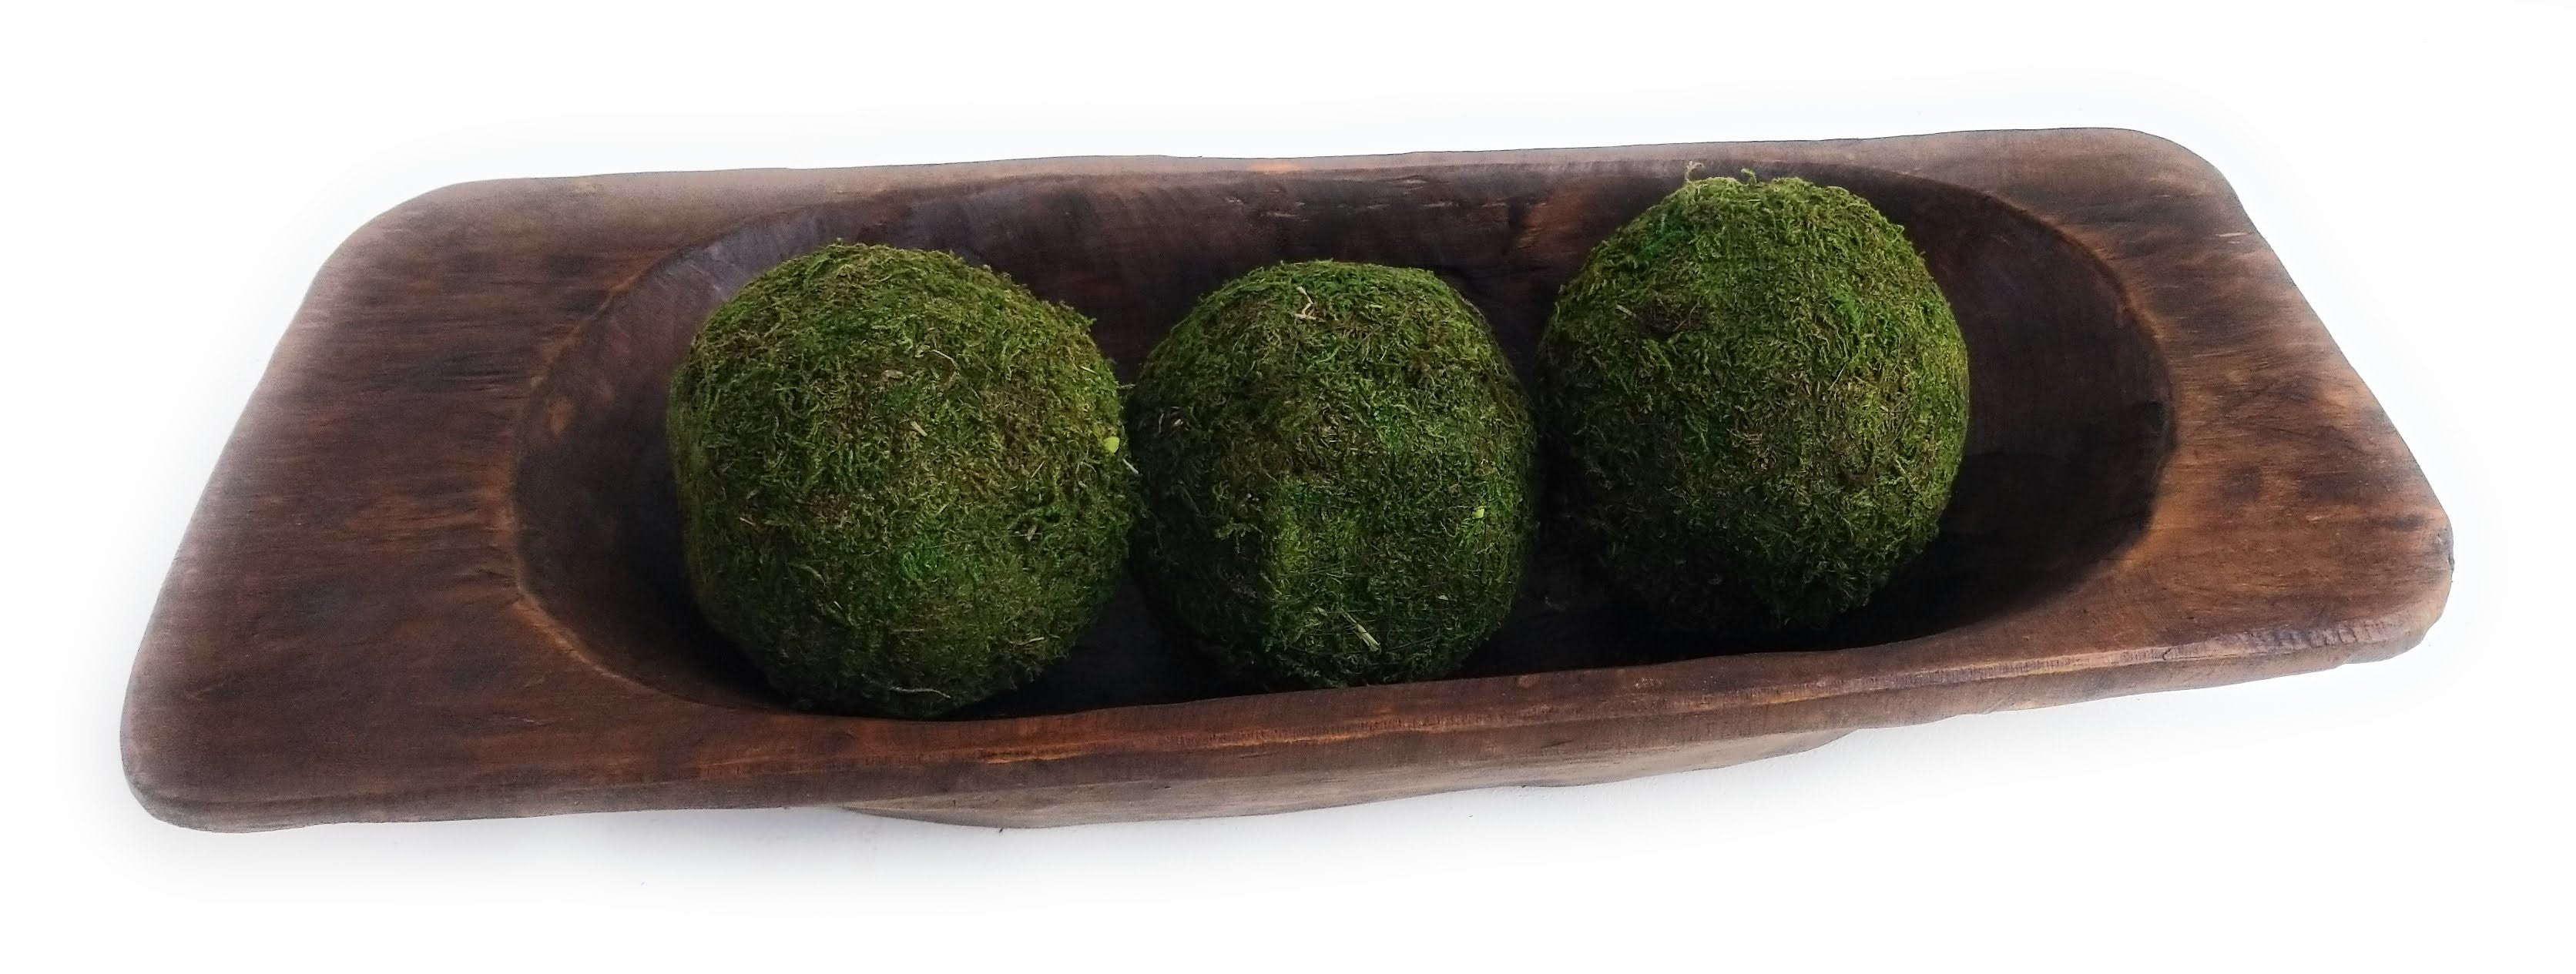 3 Inch + 5 Inch Moss Balls Multiple Sets Dough Bowl Fillers